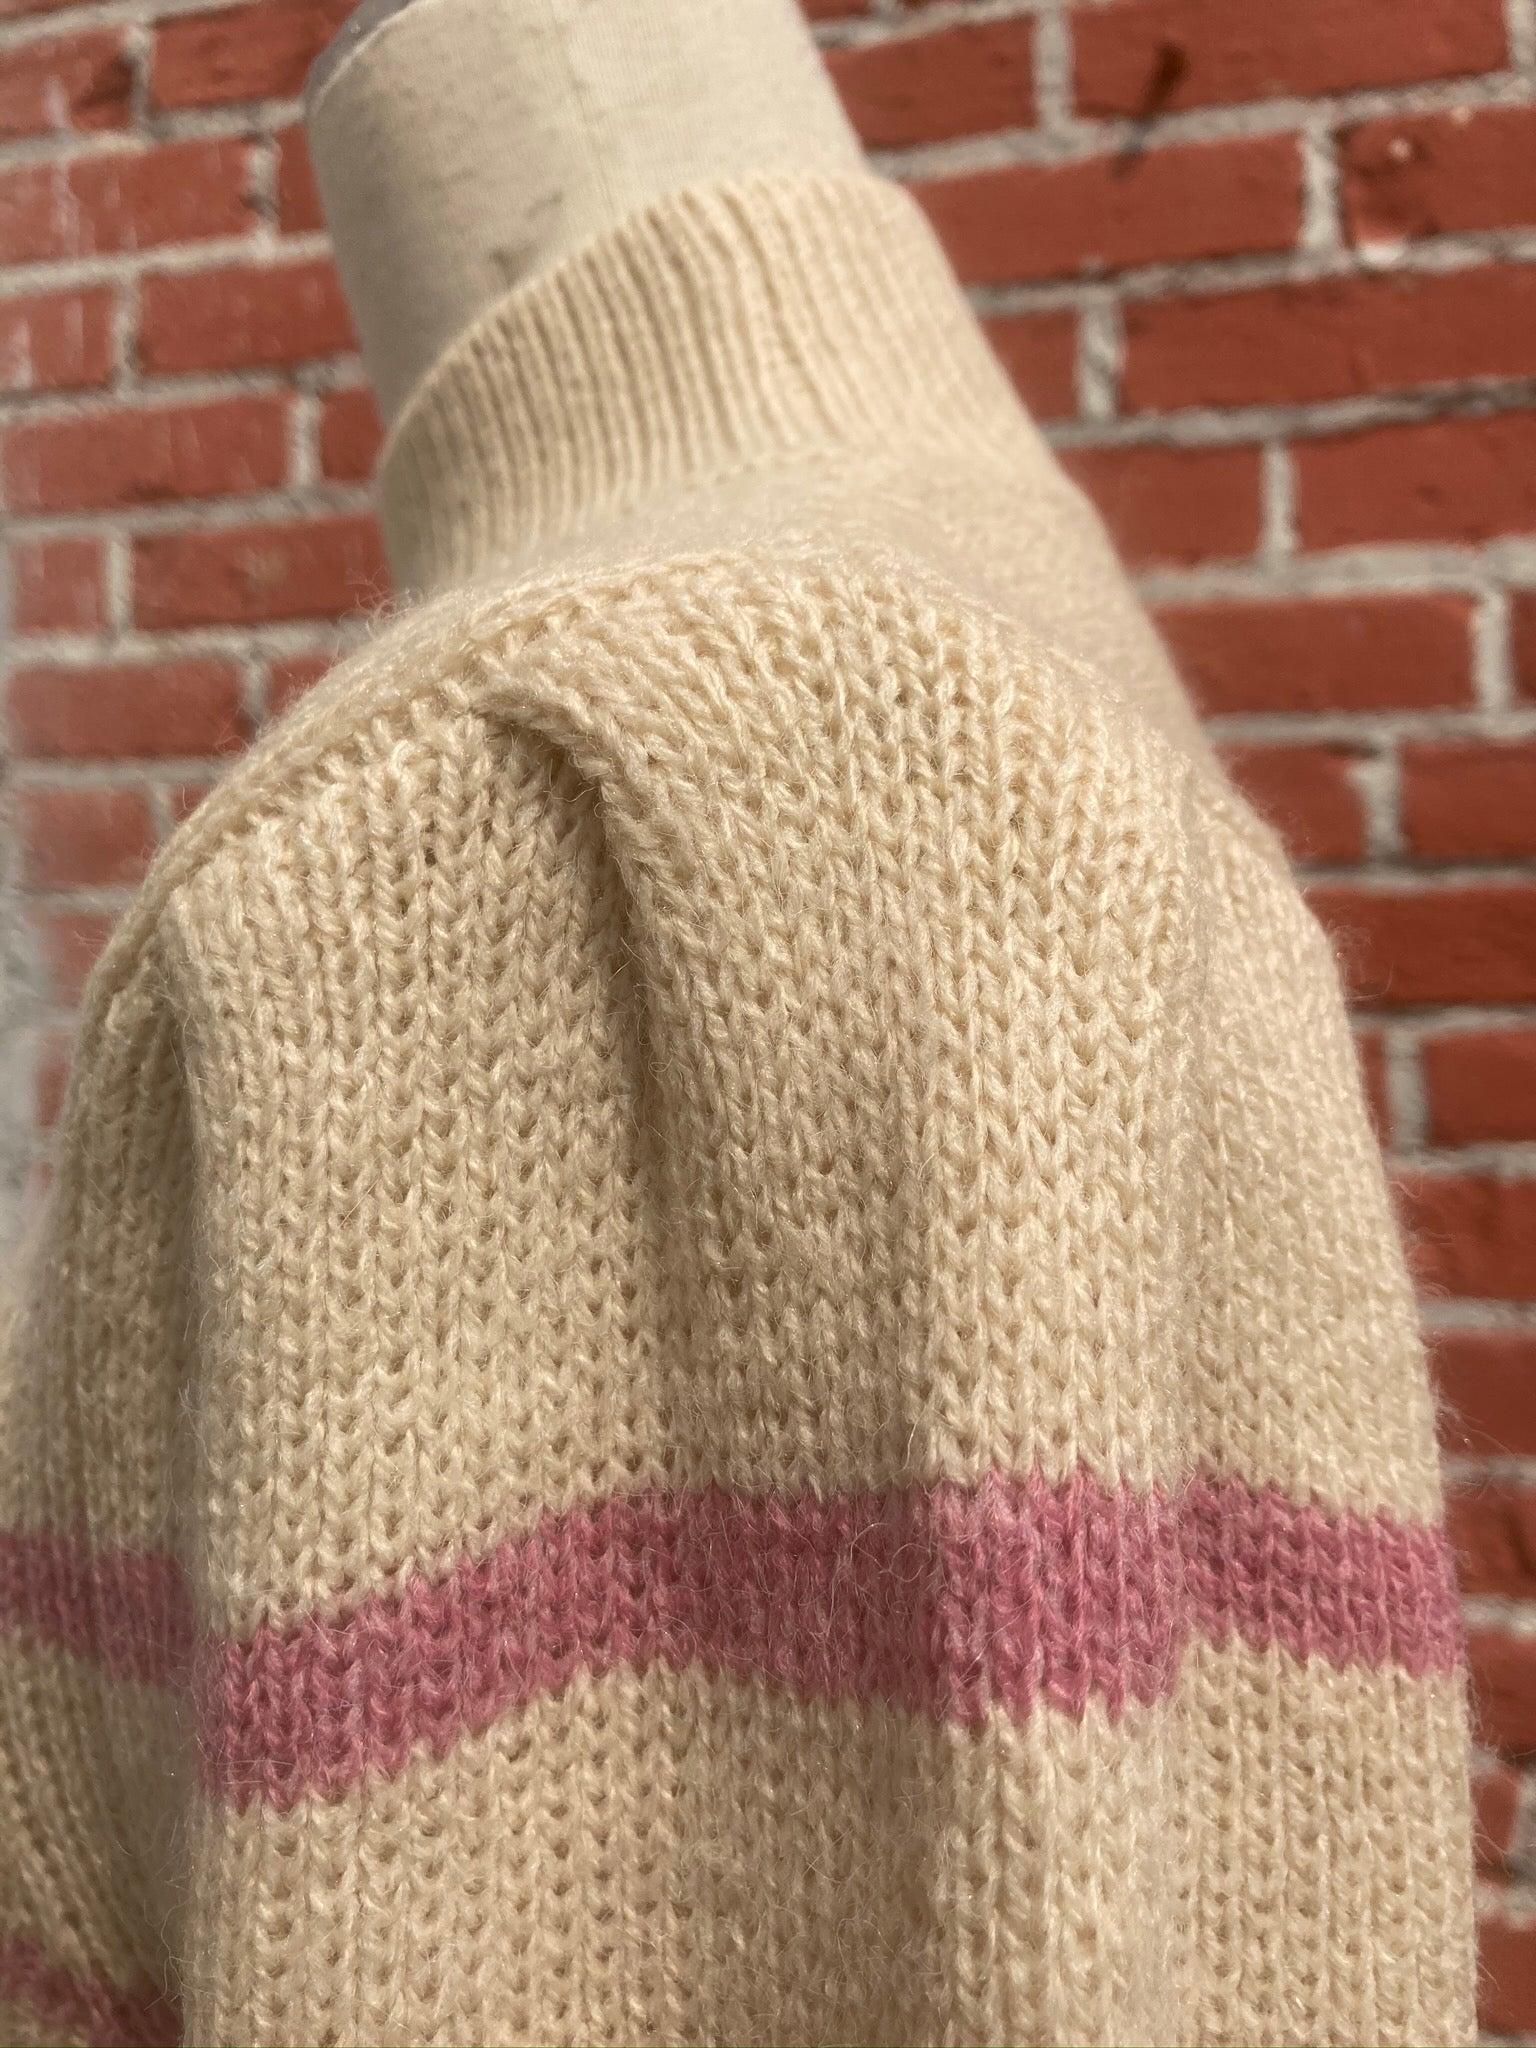 Pink and cream candy stripe  sweater with puff sleeves